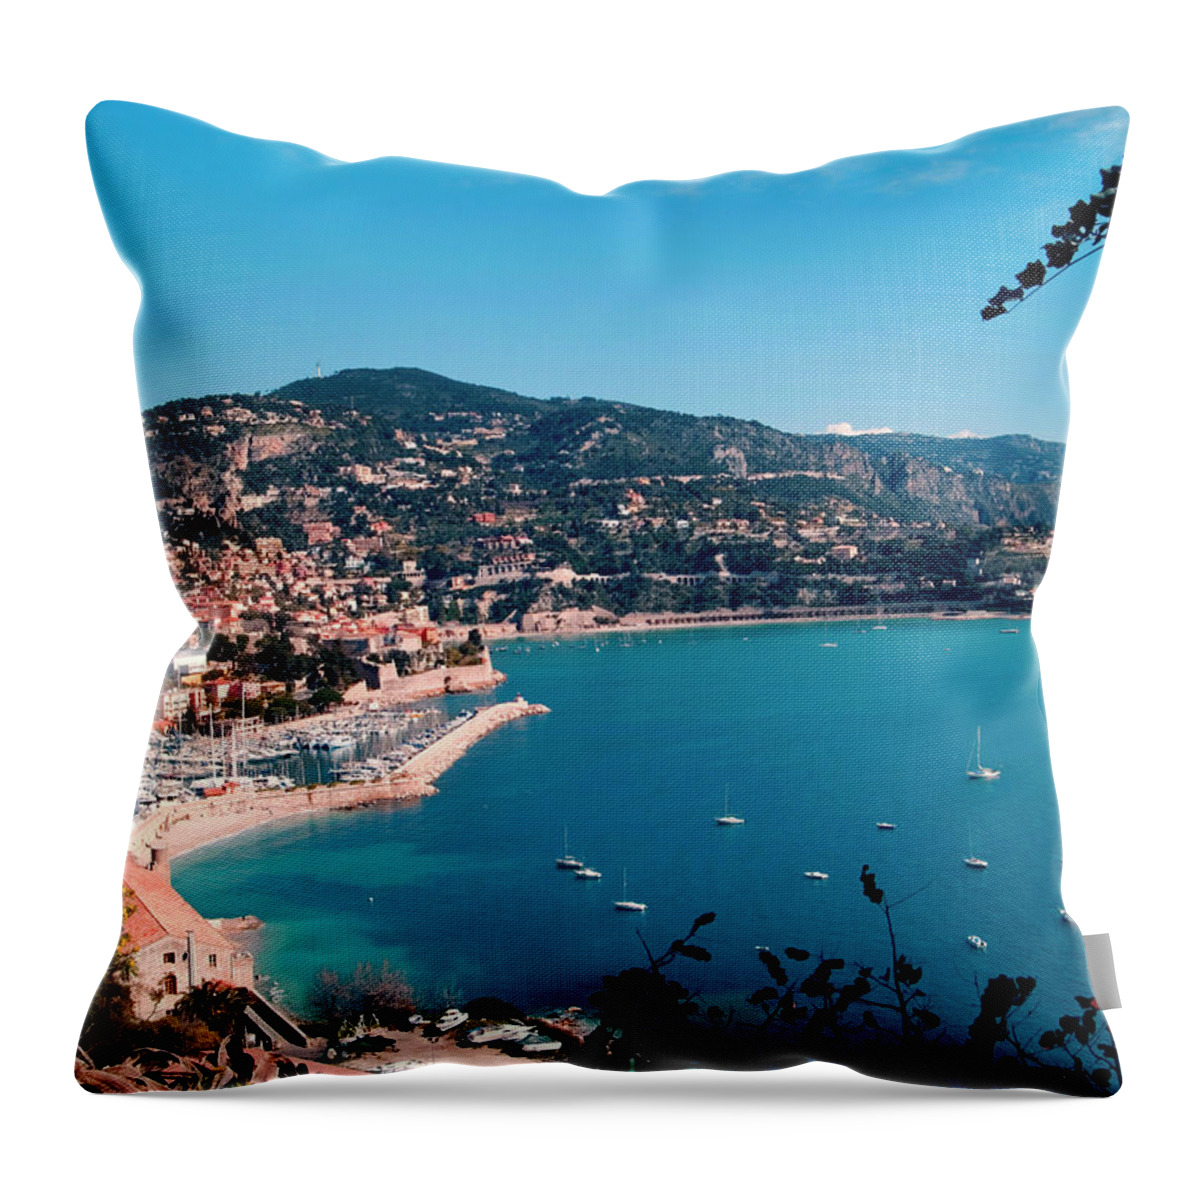 Villefranche-sur-mer Throw Pillow featuring the photograph Villefranche Sur Mer by Fcremona